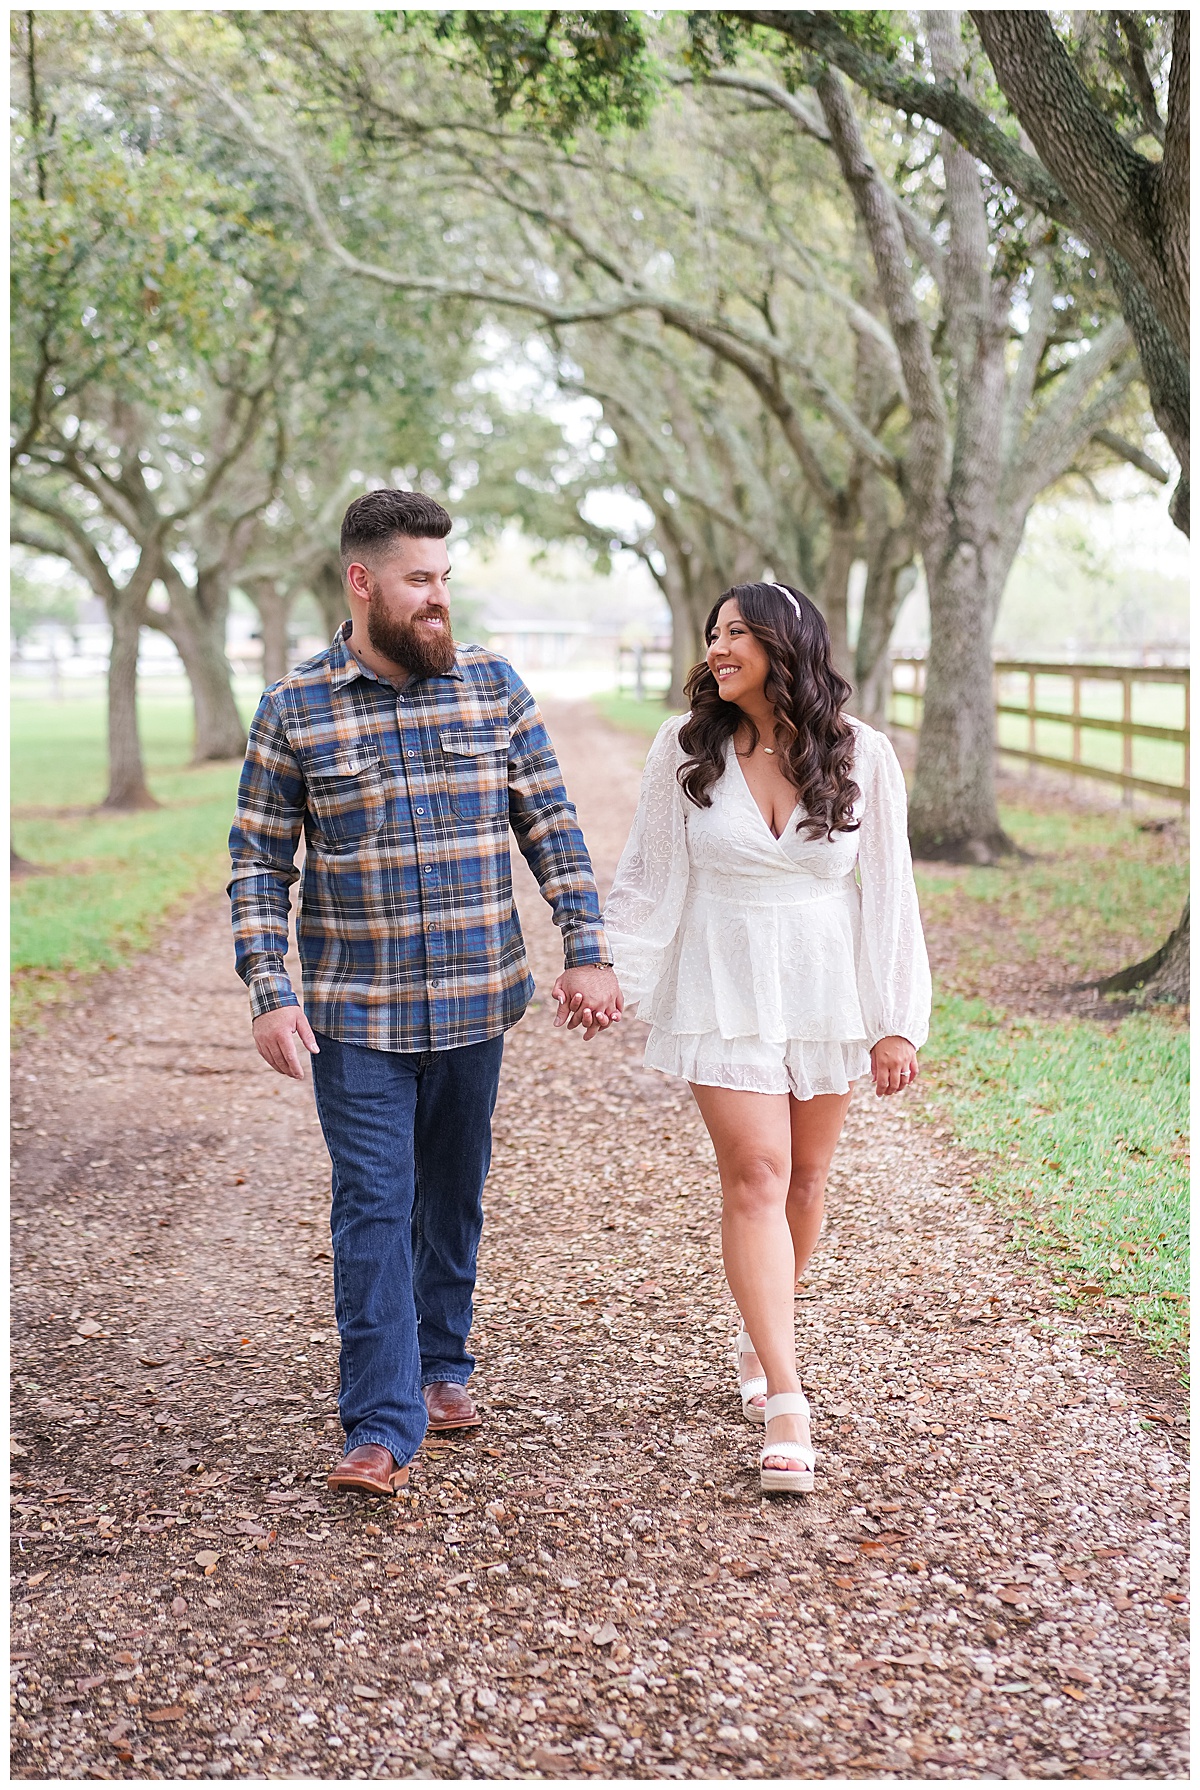 Man and woman walk hand in hand together for Houston’s Best Wedding Photographers